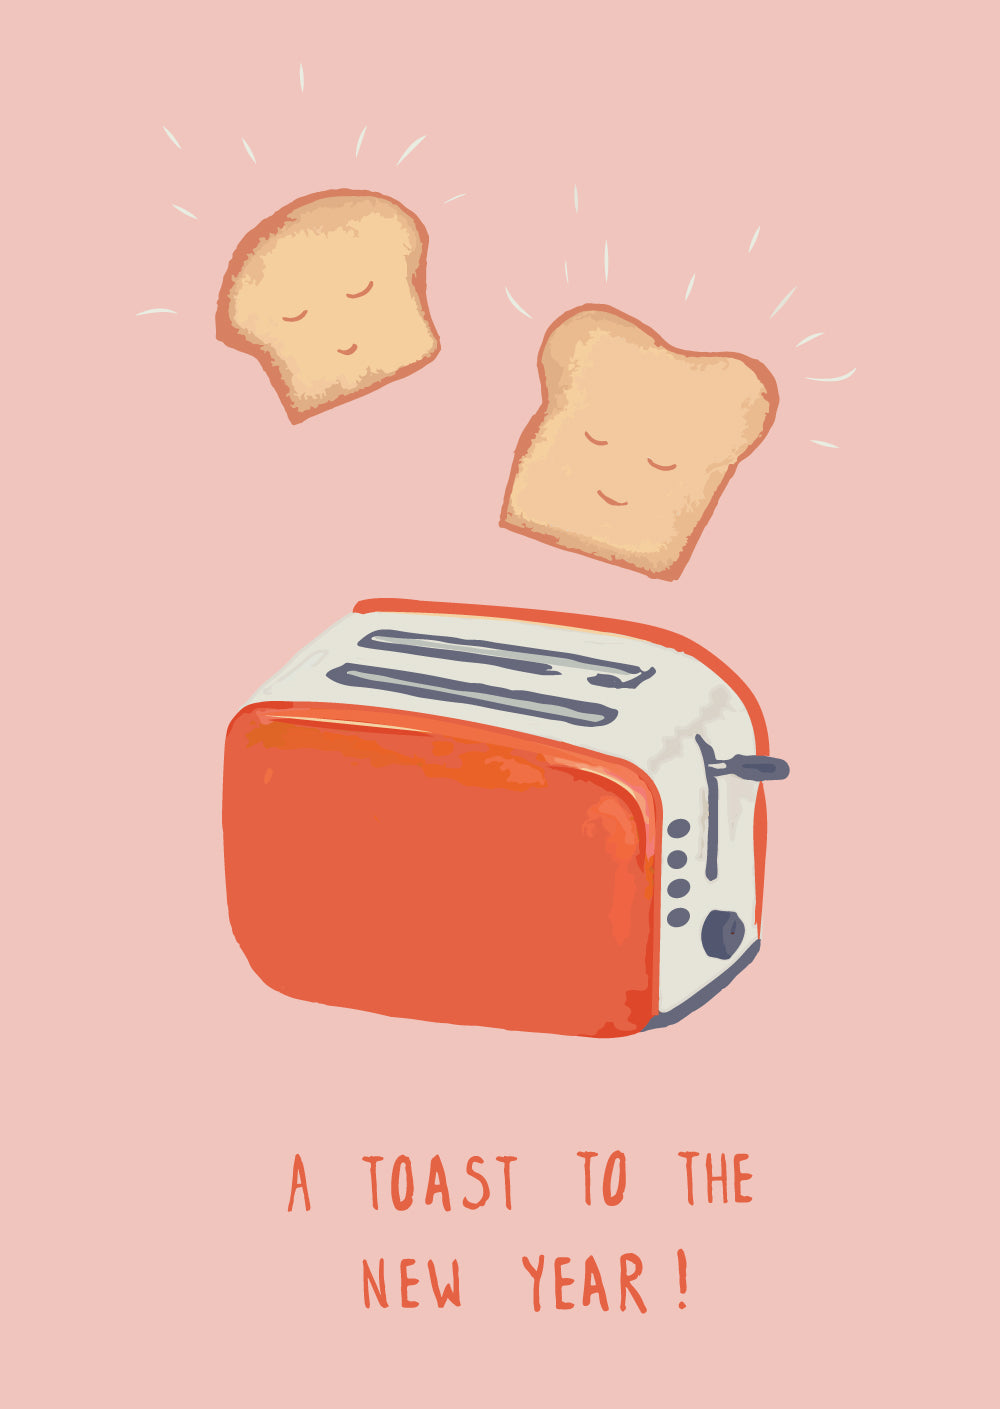 Toast popping out of a red toaster